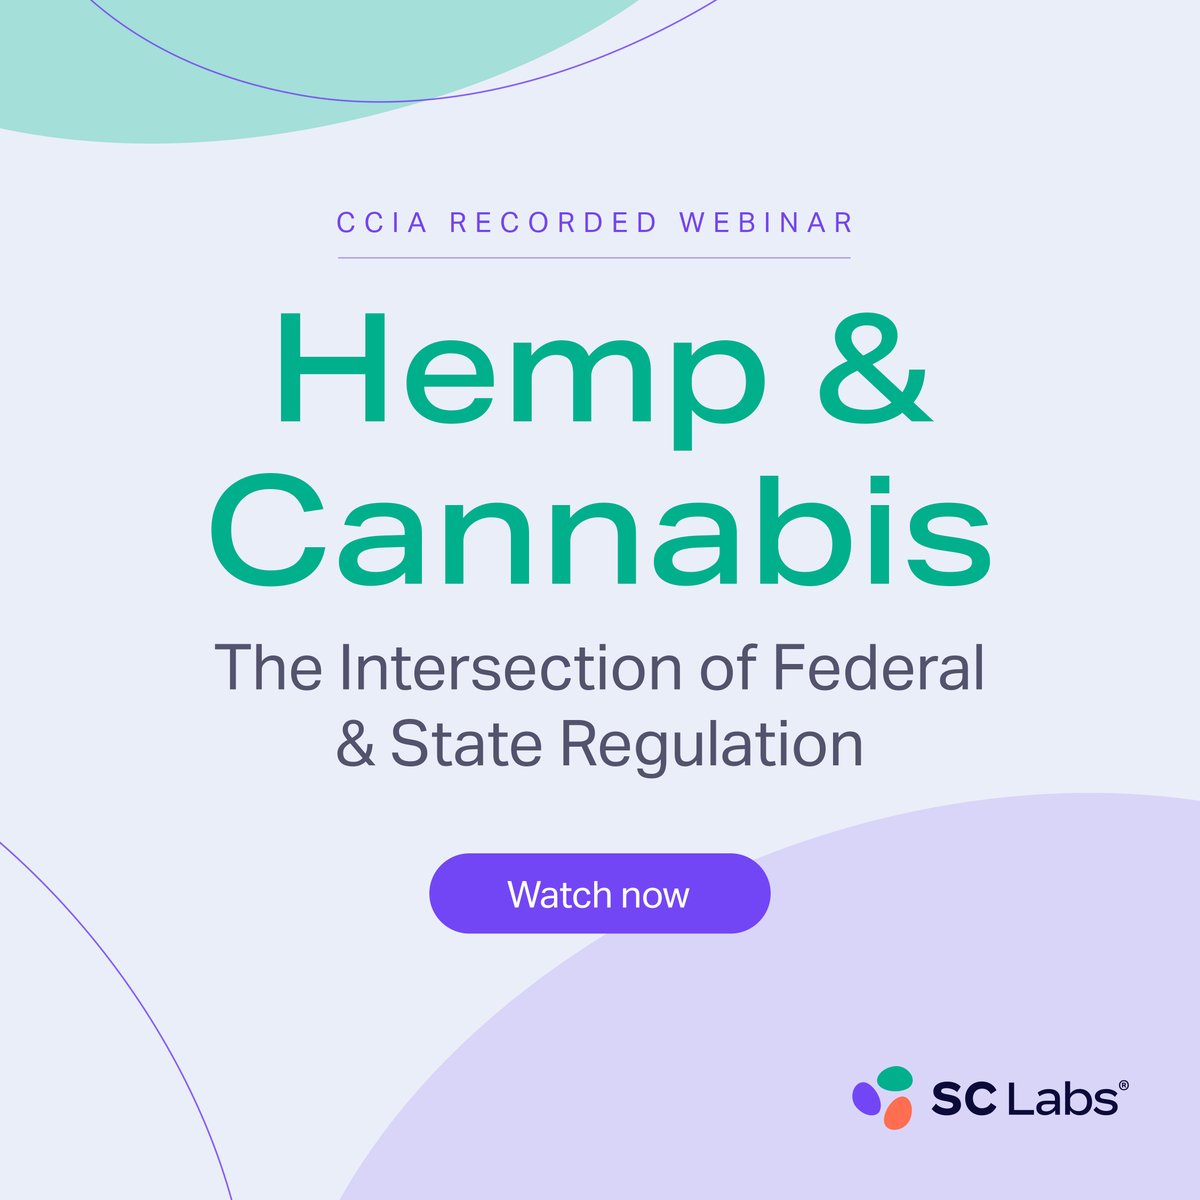 Join WeedWeek's Alex Halperin in an informative chat with SC Labs CCO/Cofounder Josh Wurzer and other industry heavyweights as they discuss hemp, and the emerging industry’s intersection with legal cannabis.

hubs.ly/Q0229p3p0

#cannabistesting #hemptesting #hemp #cbd